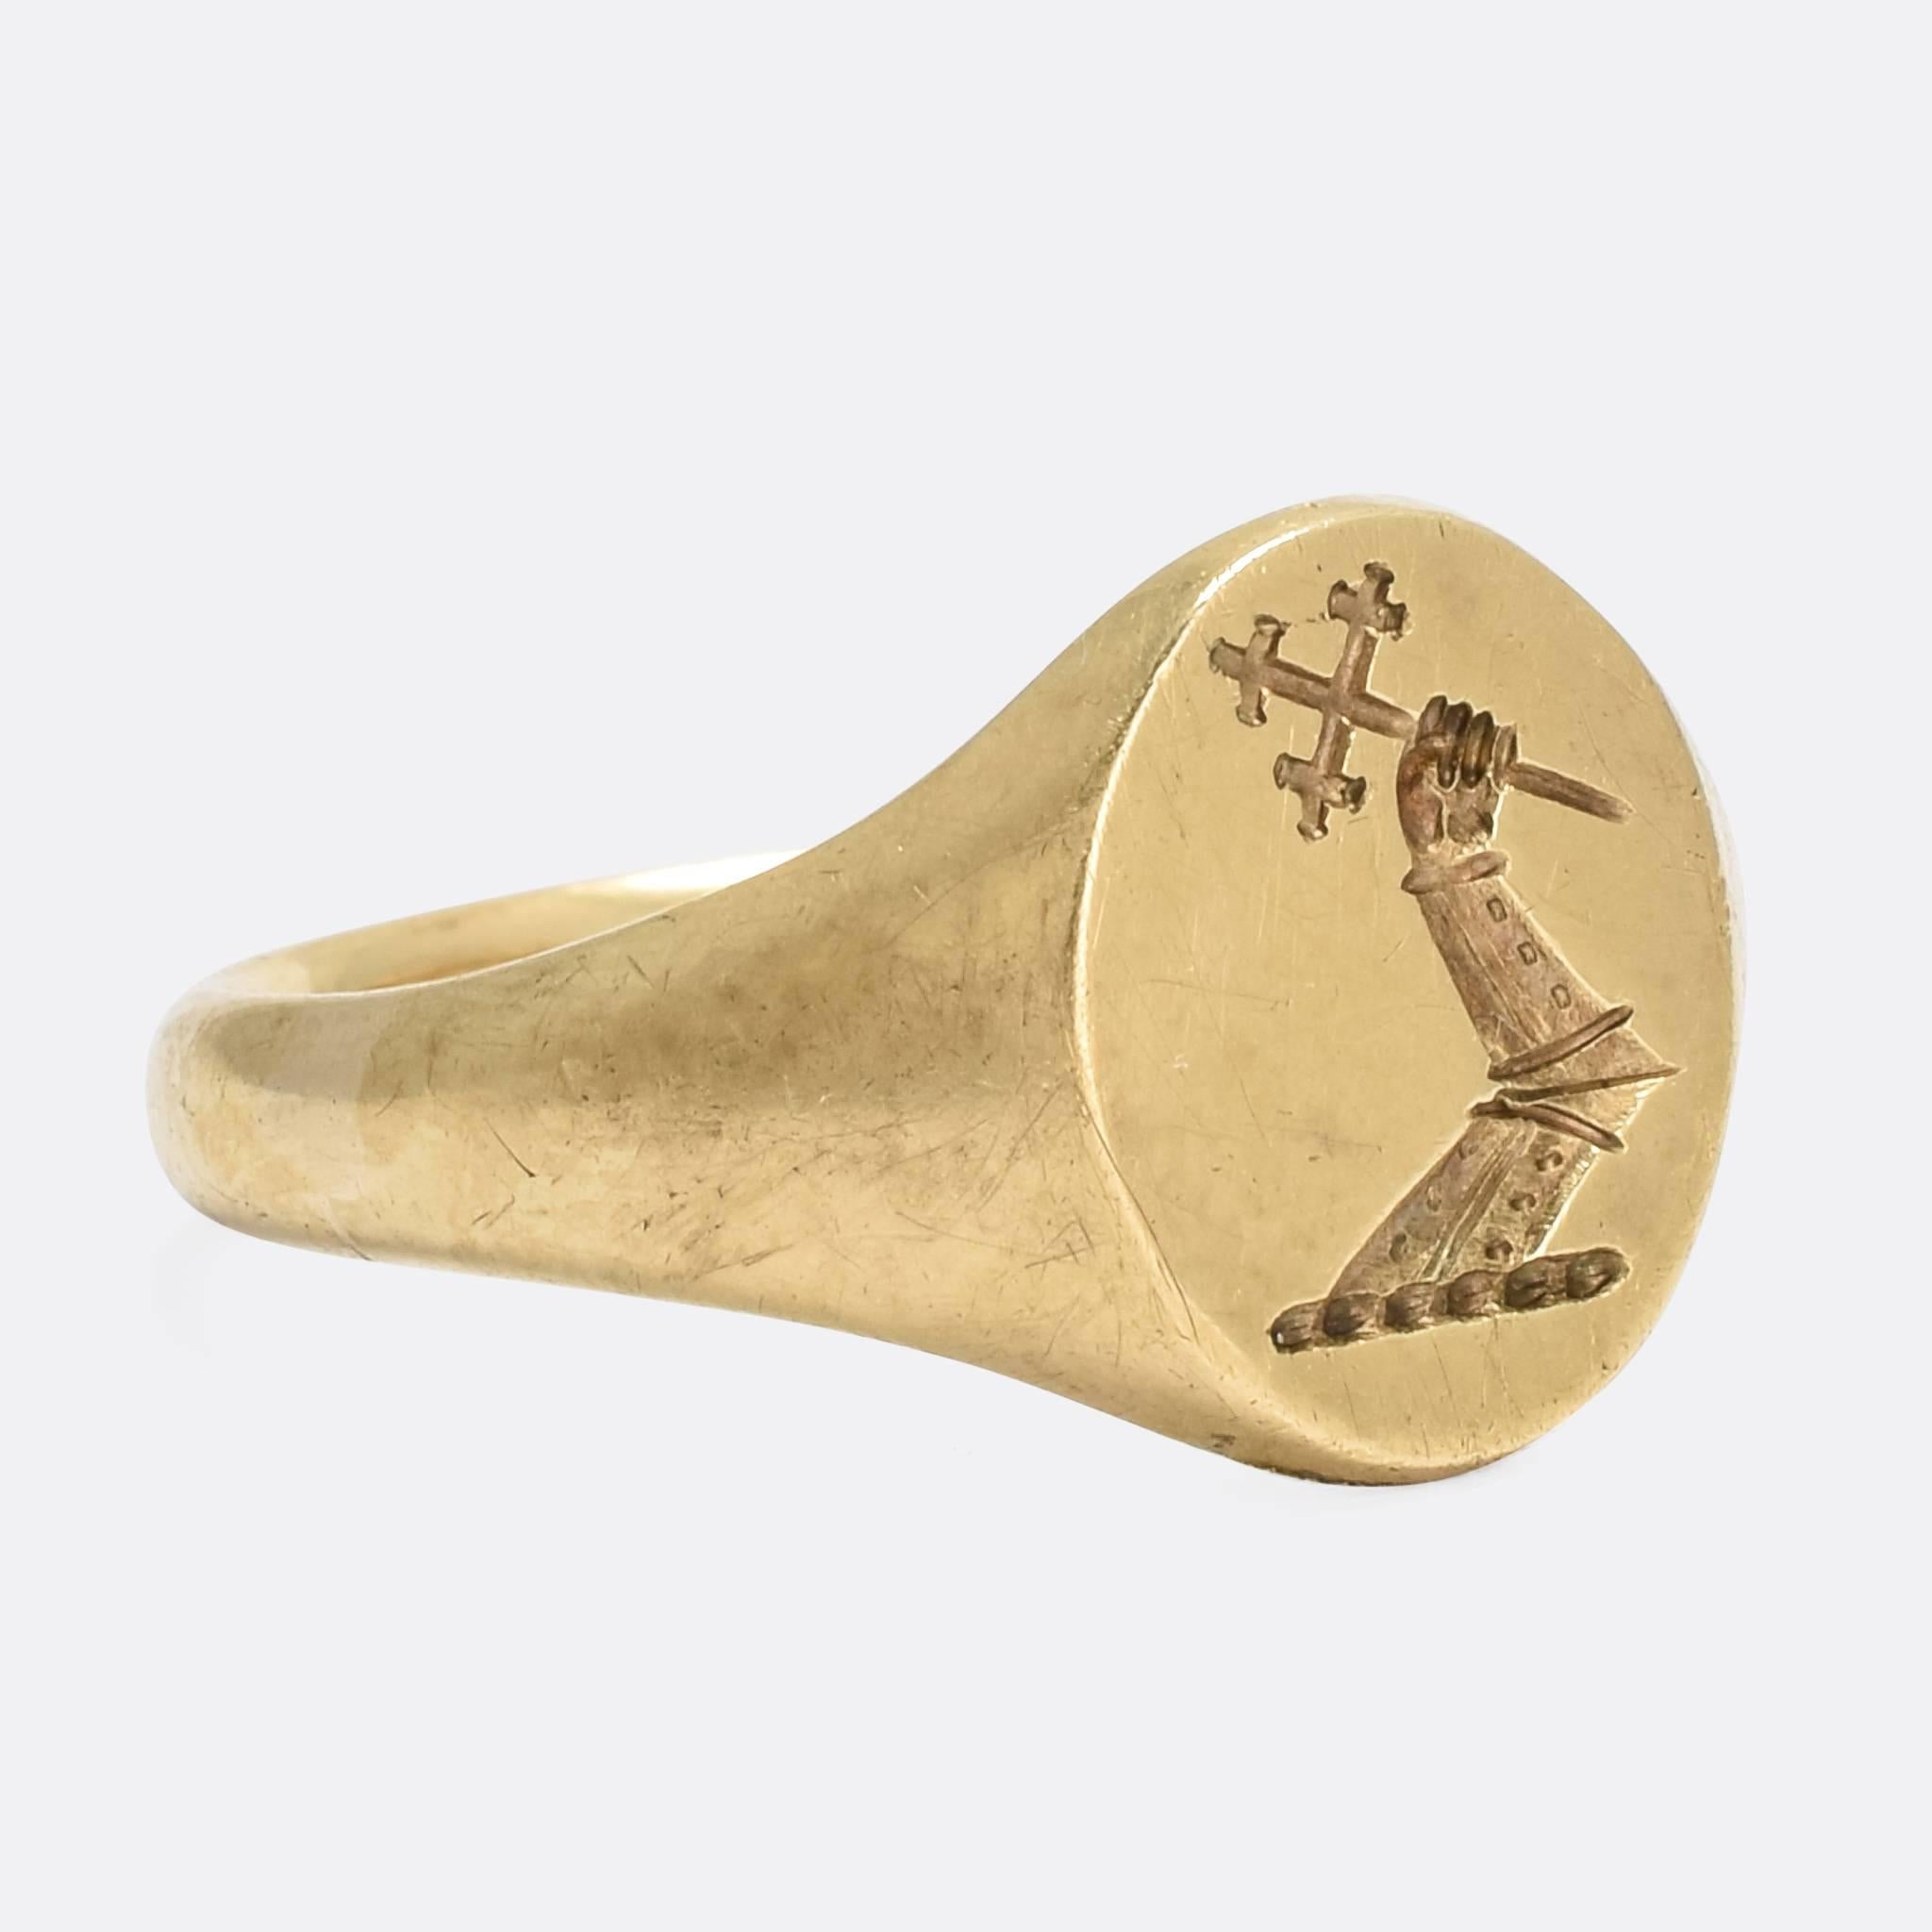 A fine quality vintage signet ring by the esteemed jewellers Deakin & Francis. The face has been carved with an English heraldic crest depicting an Arm - clad in armour - holding a Cross. According to Fairbarn's Book of Crests, this particular seal